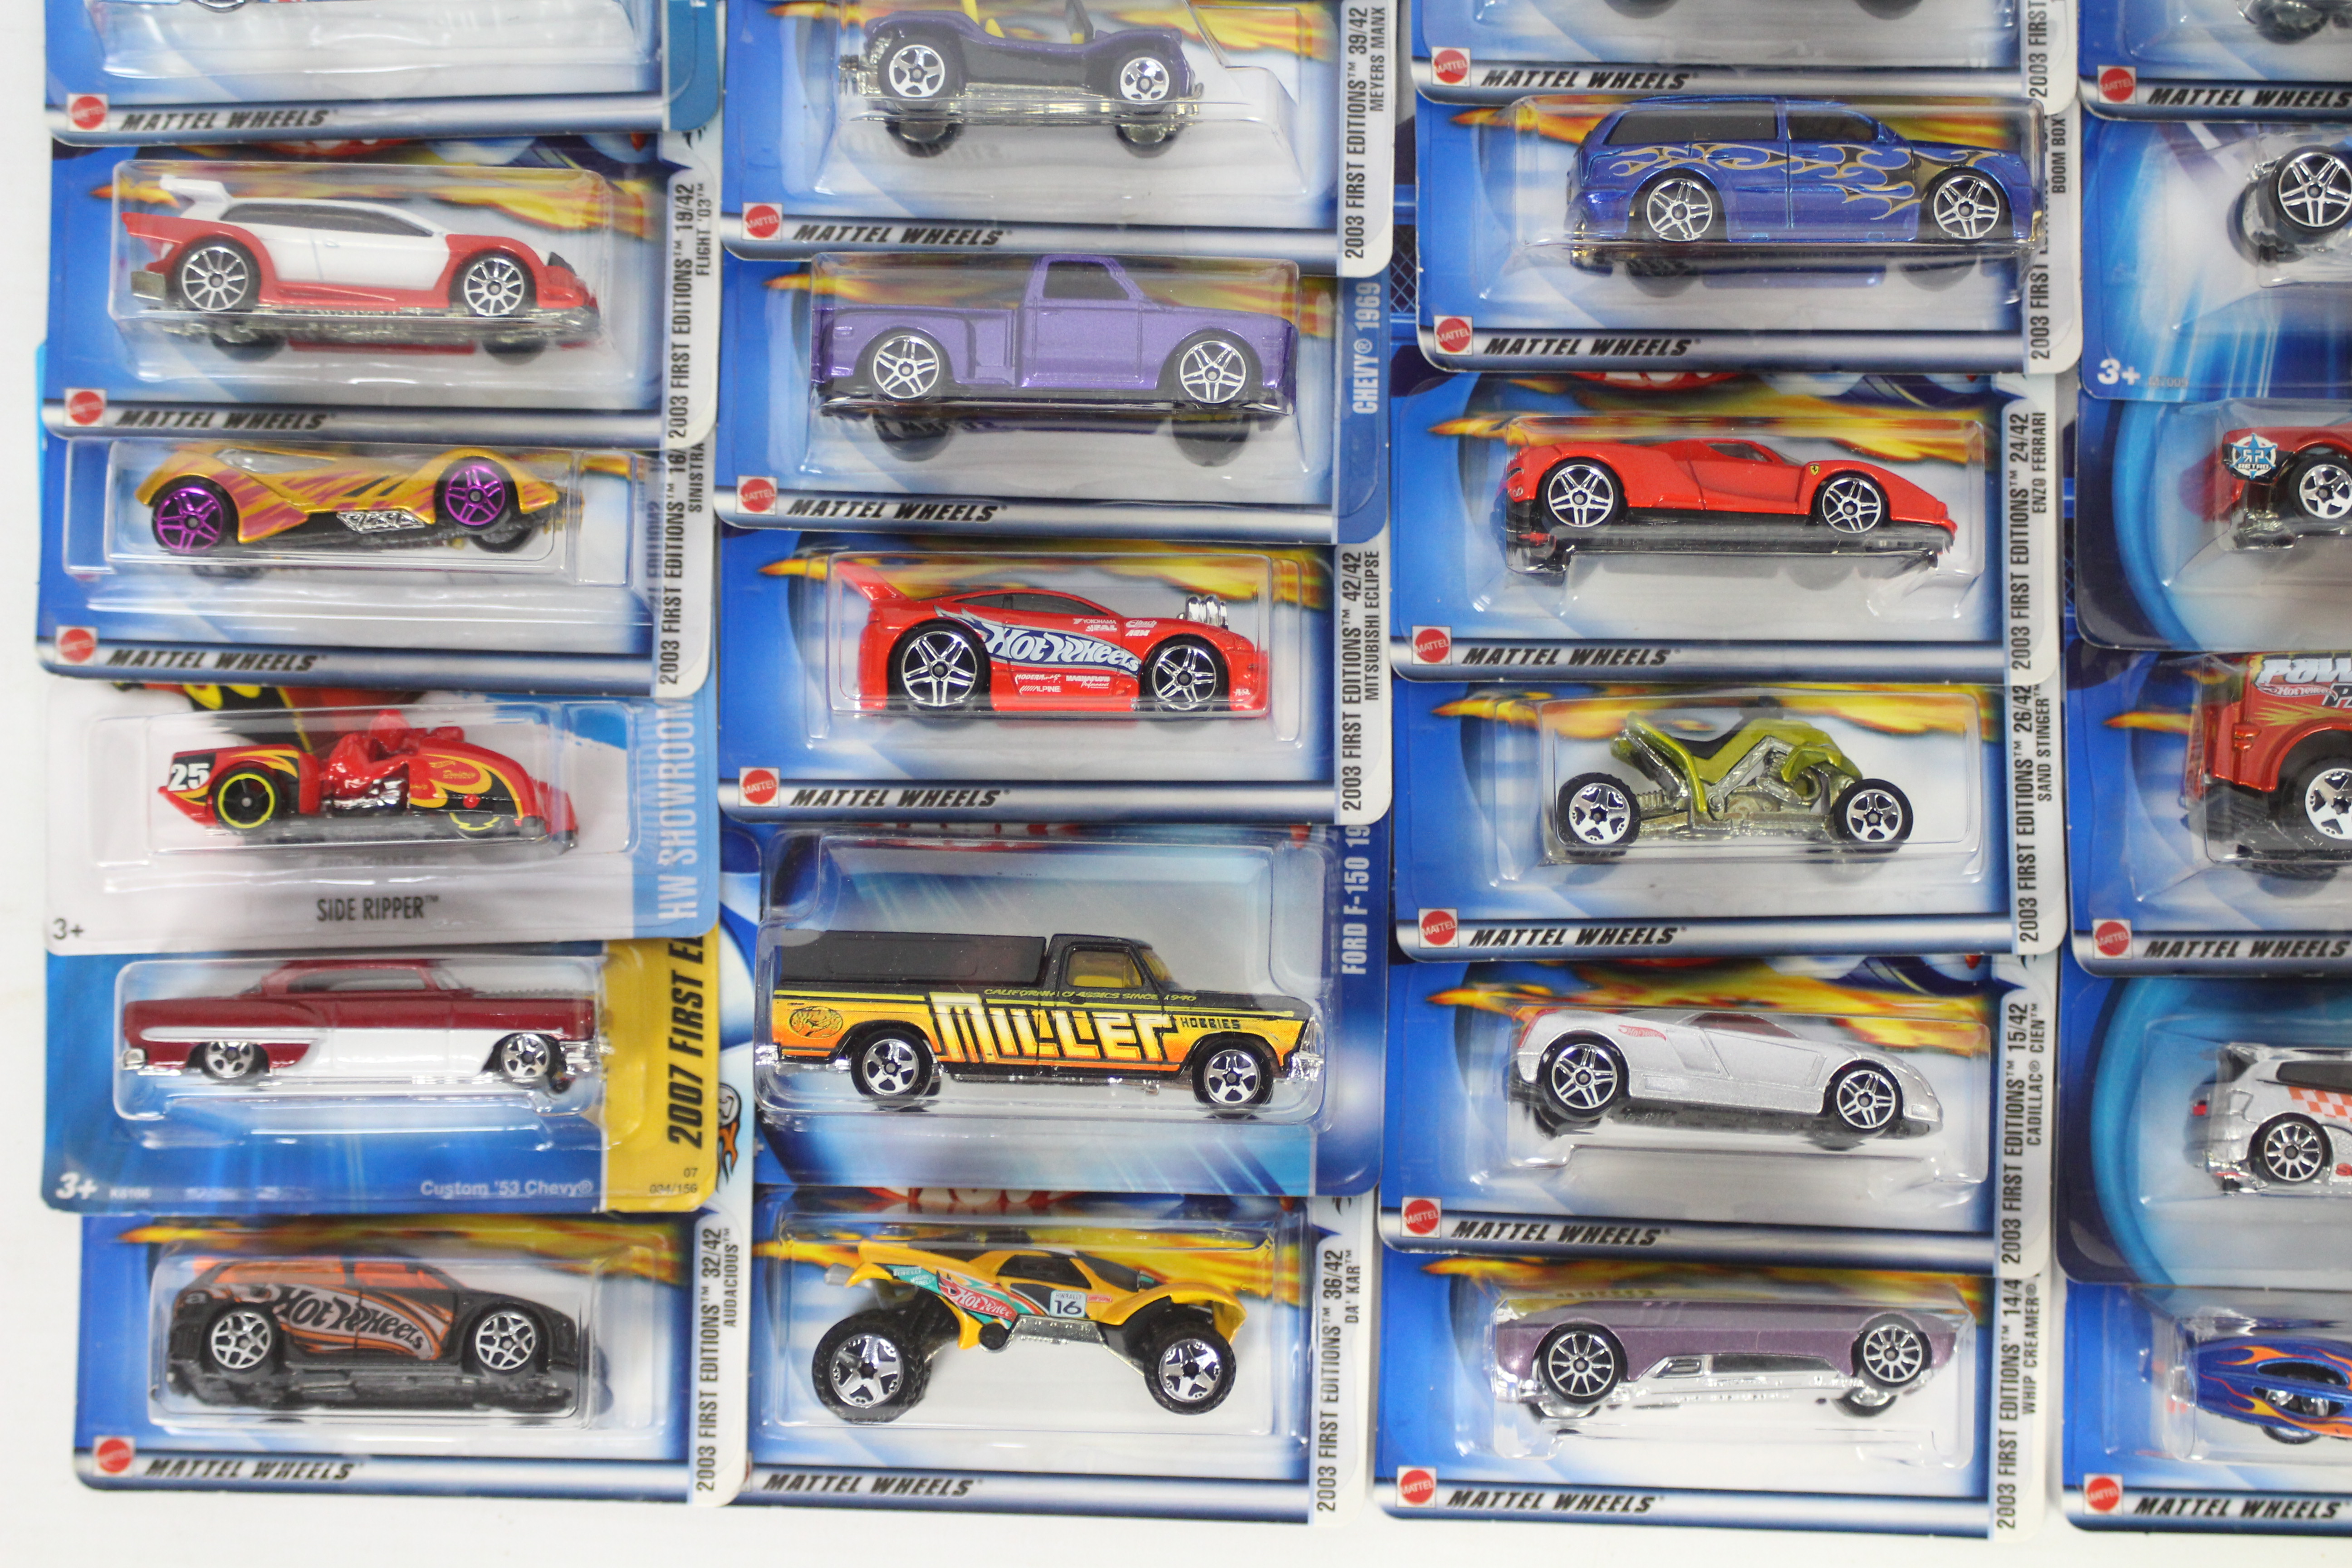 Hot Wheels - 50 x unopened carded models from the early 2000s including Bugatti Veyron # 56392, - Image 5 of 5